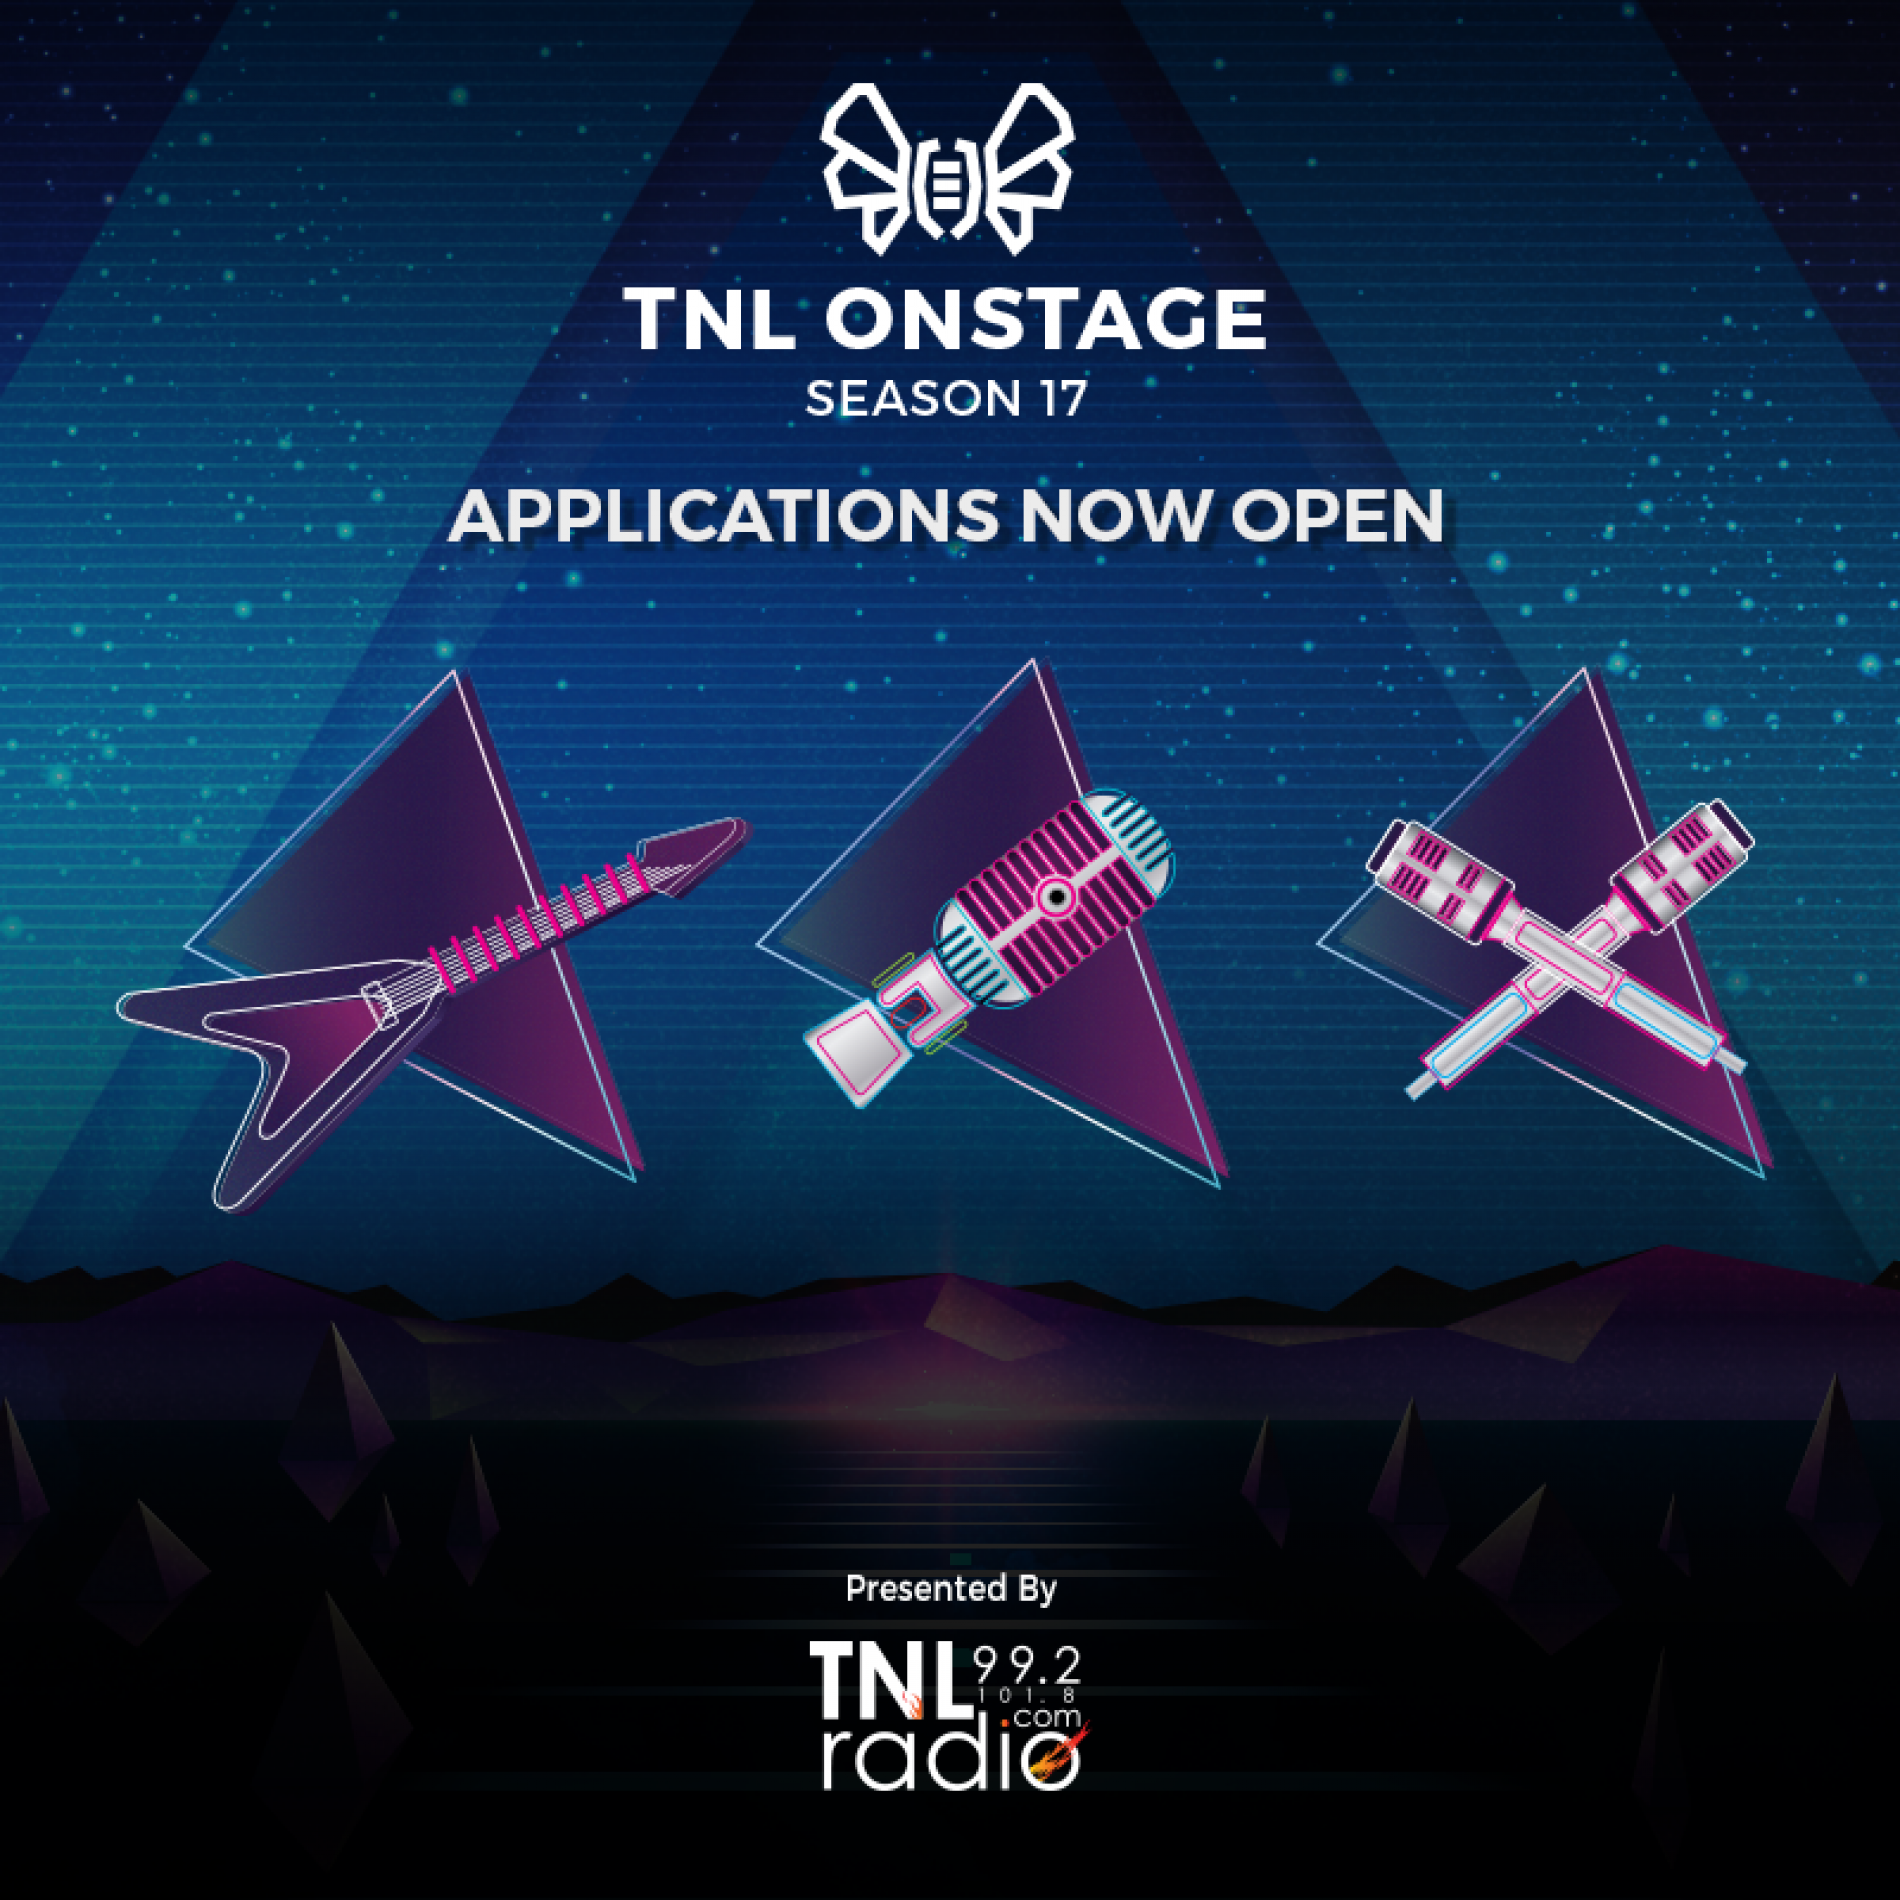 TNL Onstage Is Back!